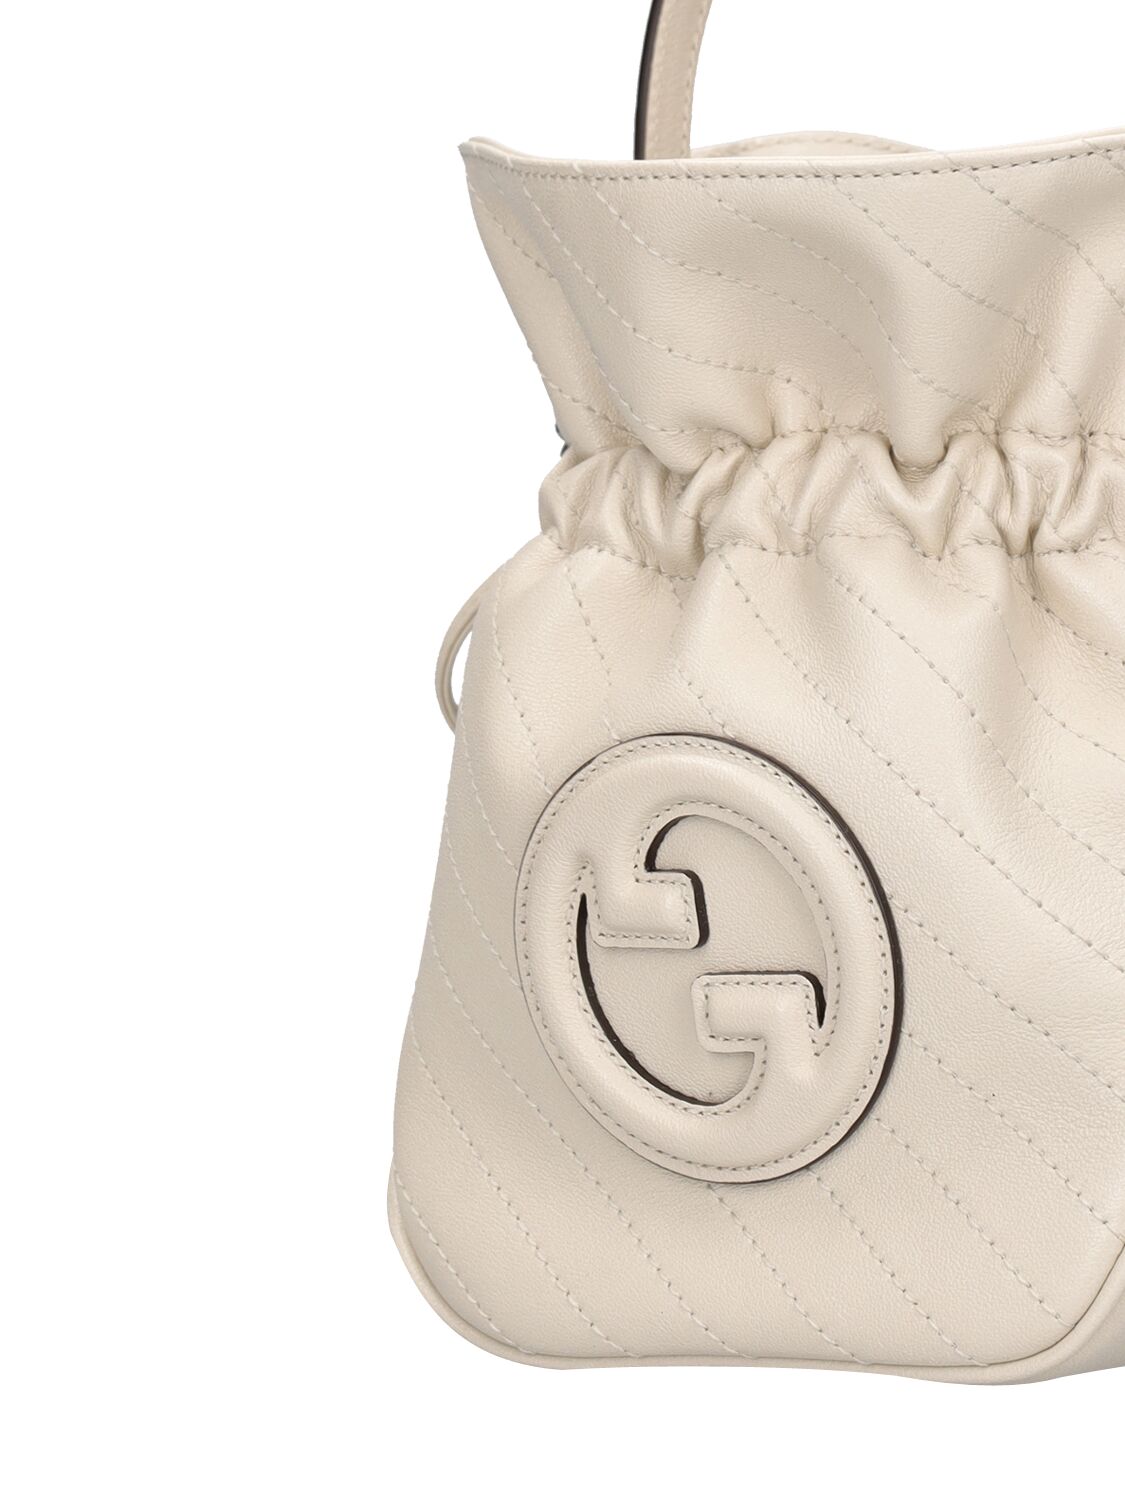 Shop Gucci Mini Blondie Leather Bucket Bag In Mystic White